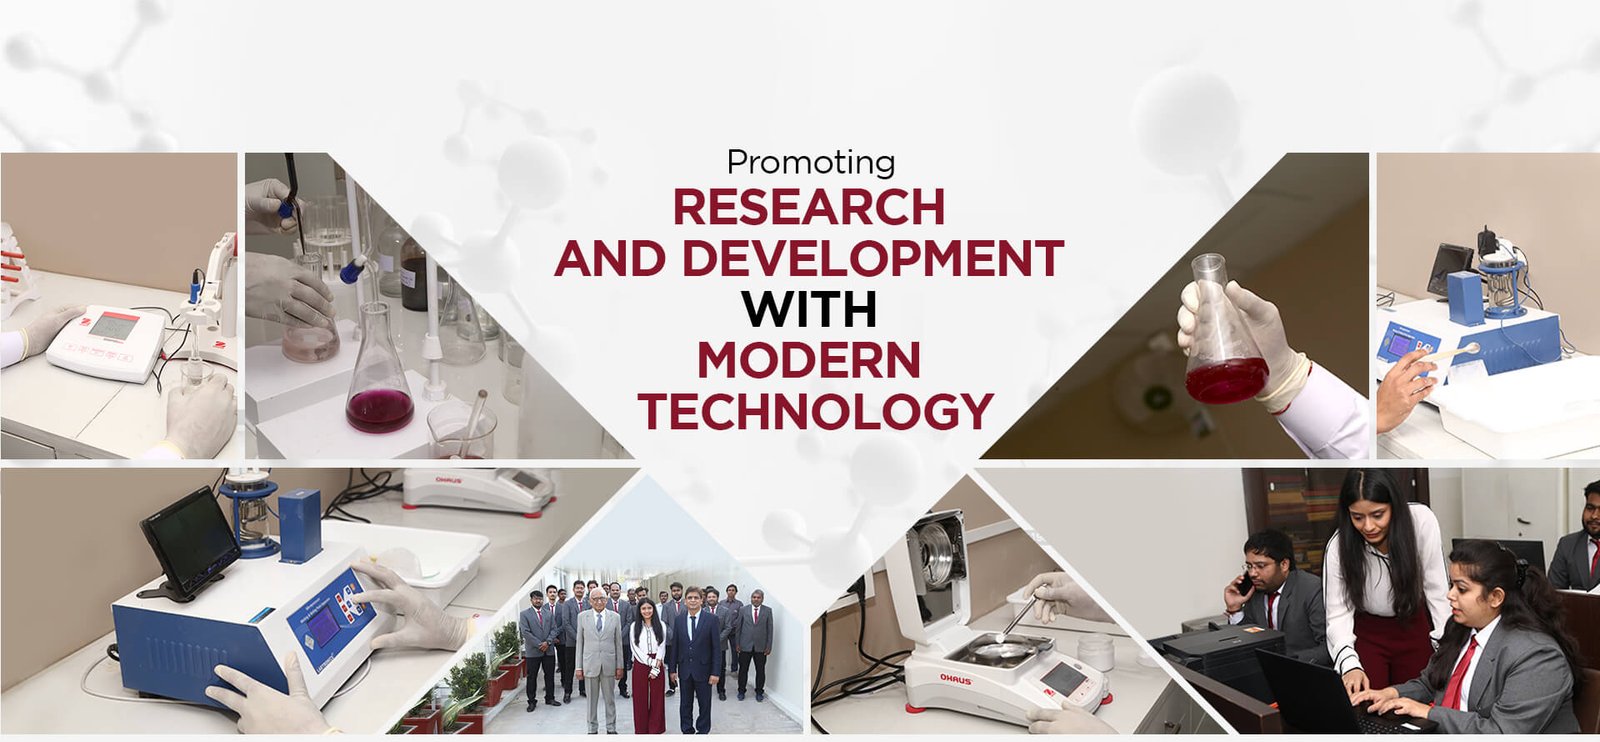 Research and development with modern technology